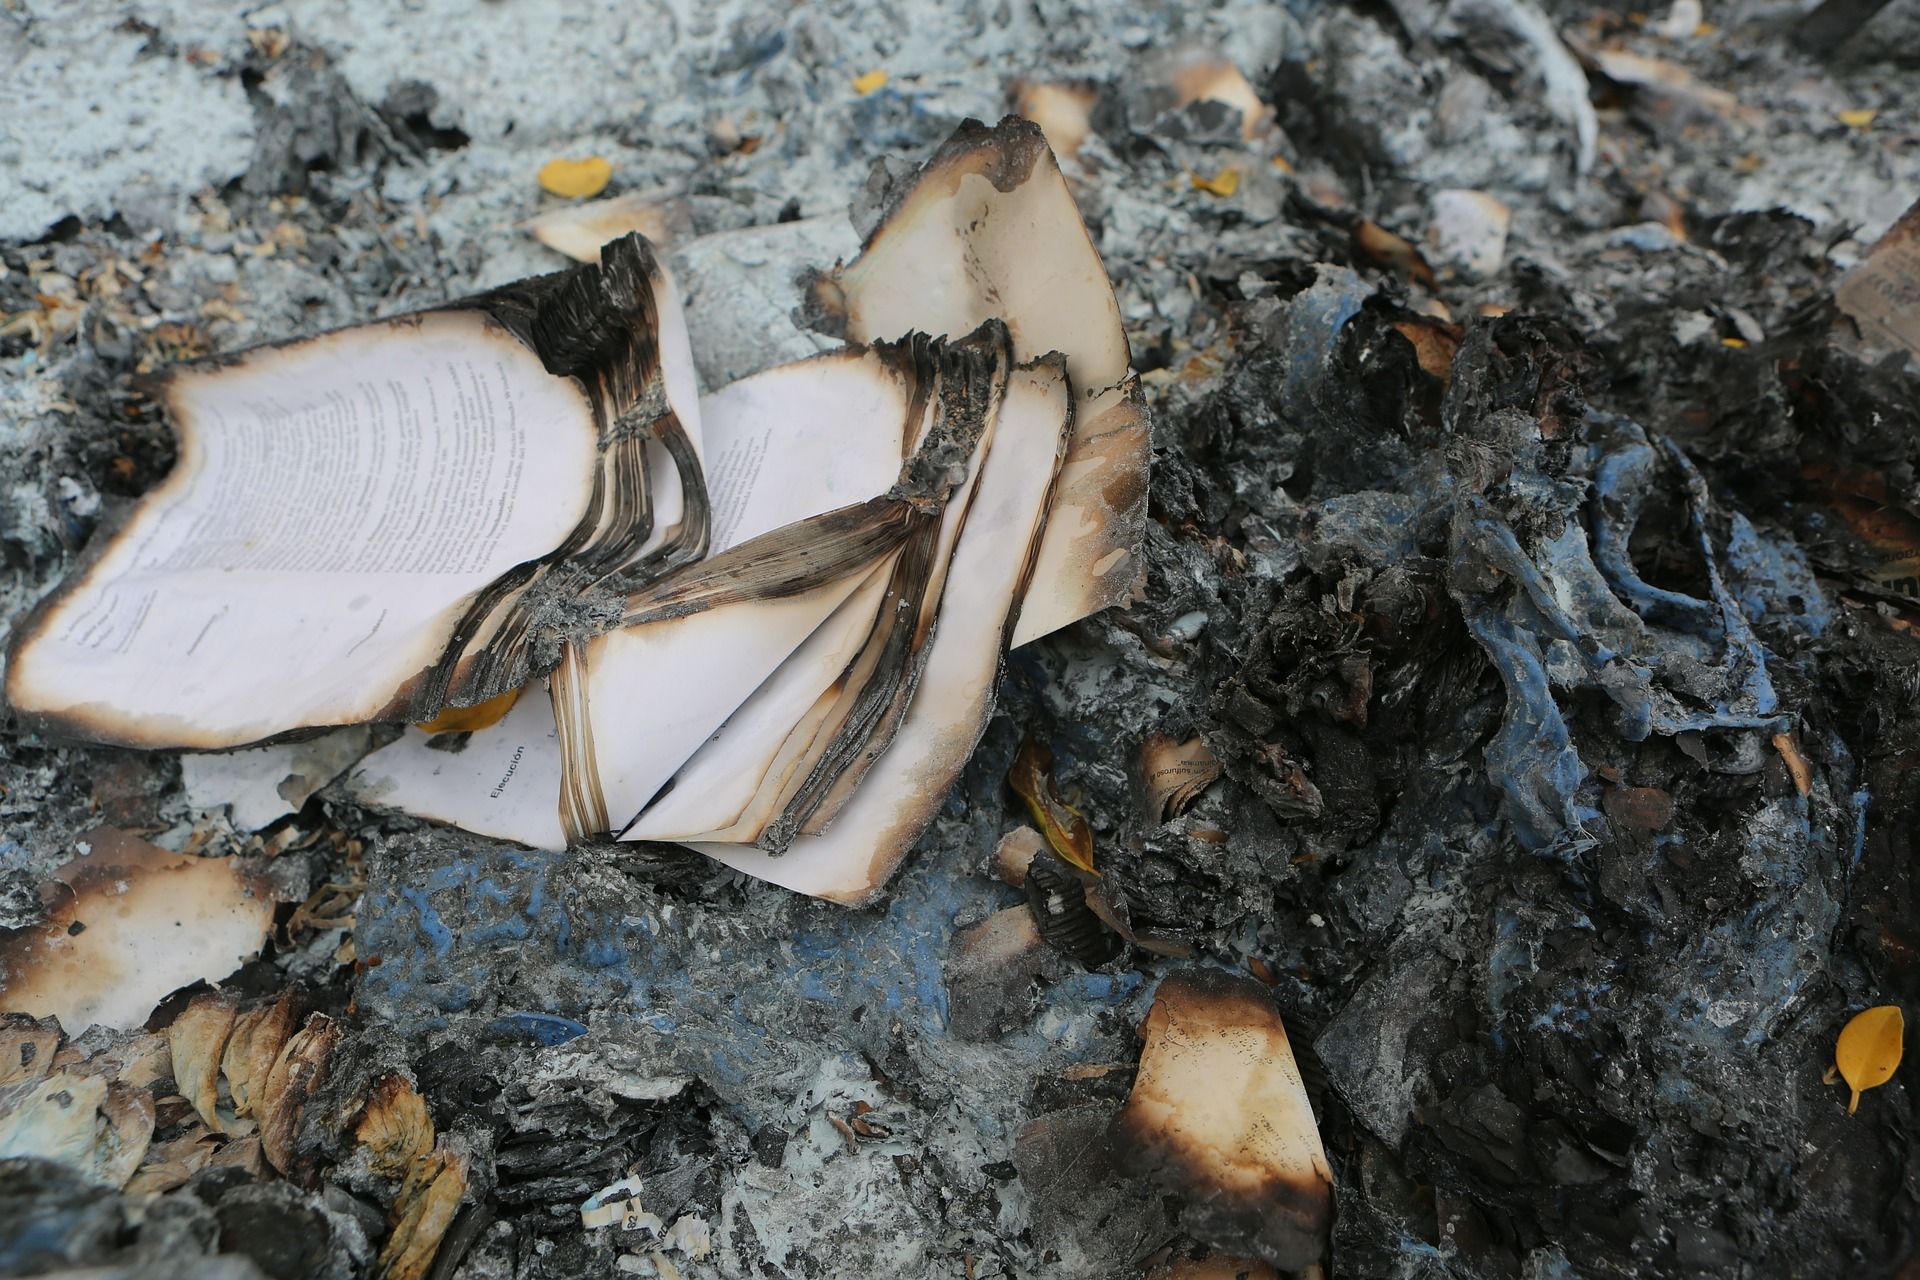 Burnt paper and ashes in a pile on the floor